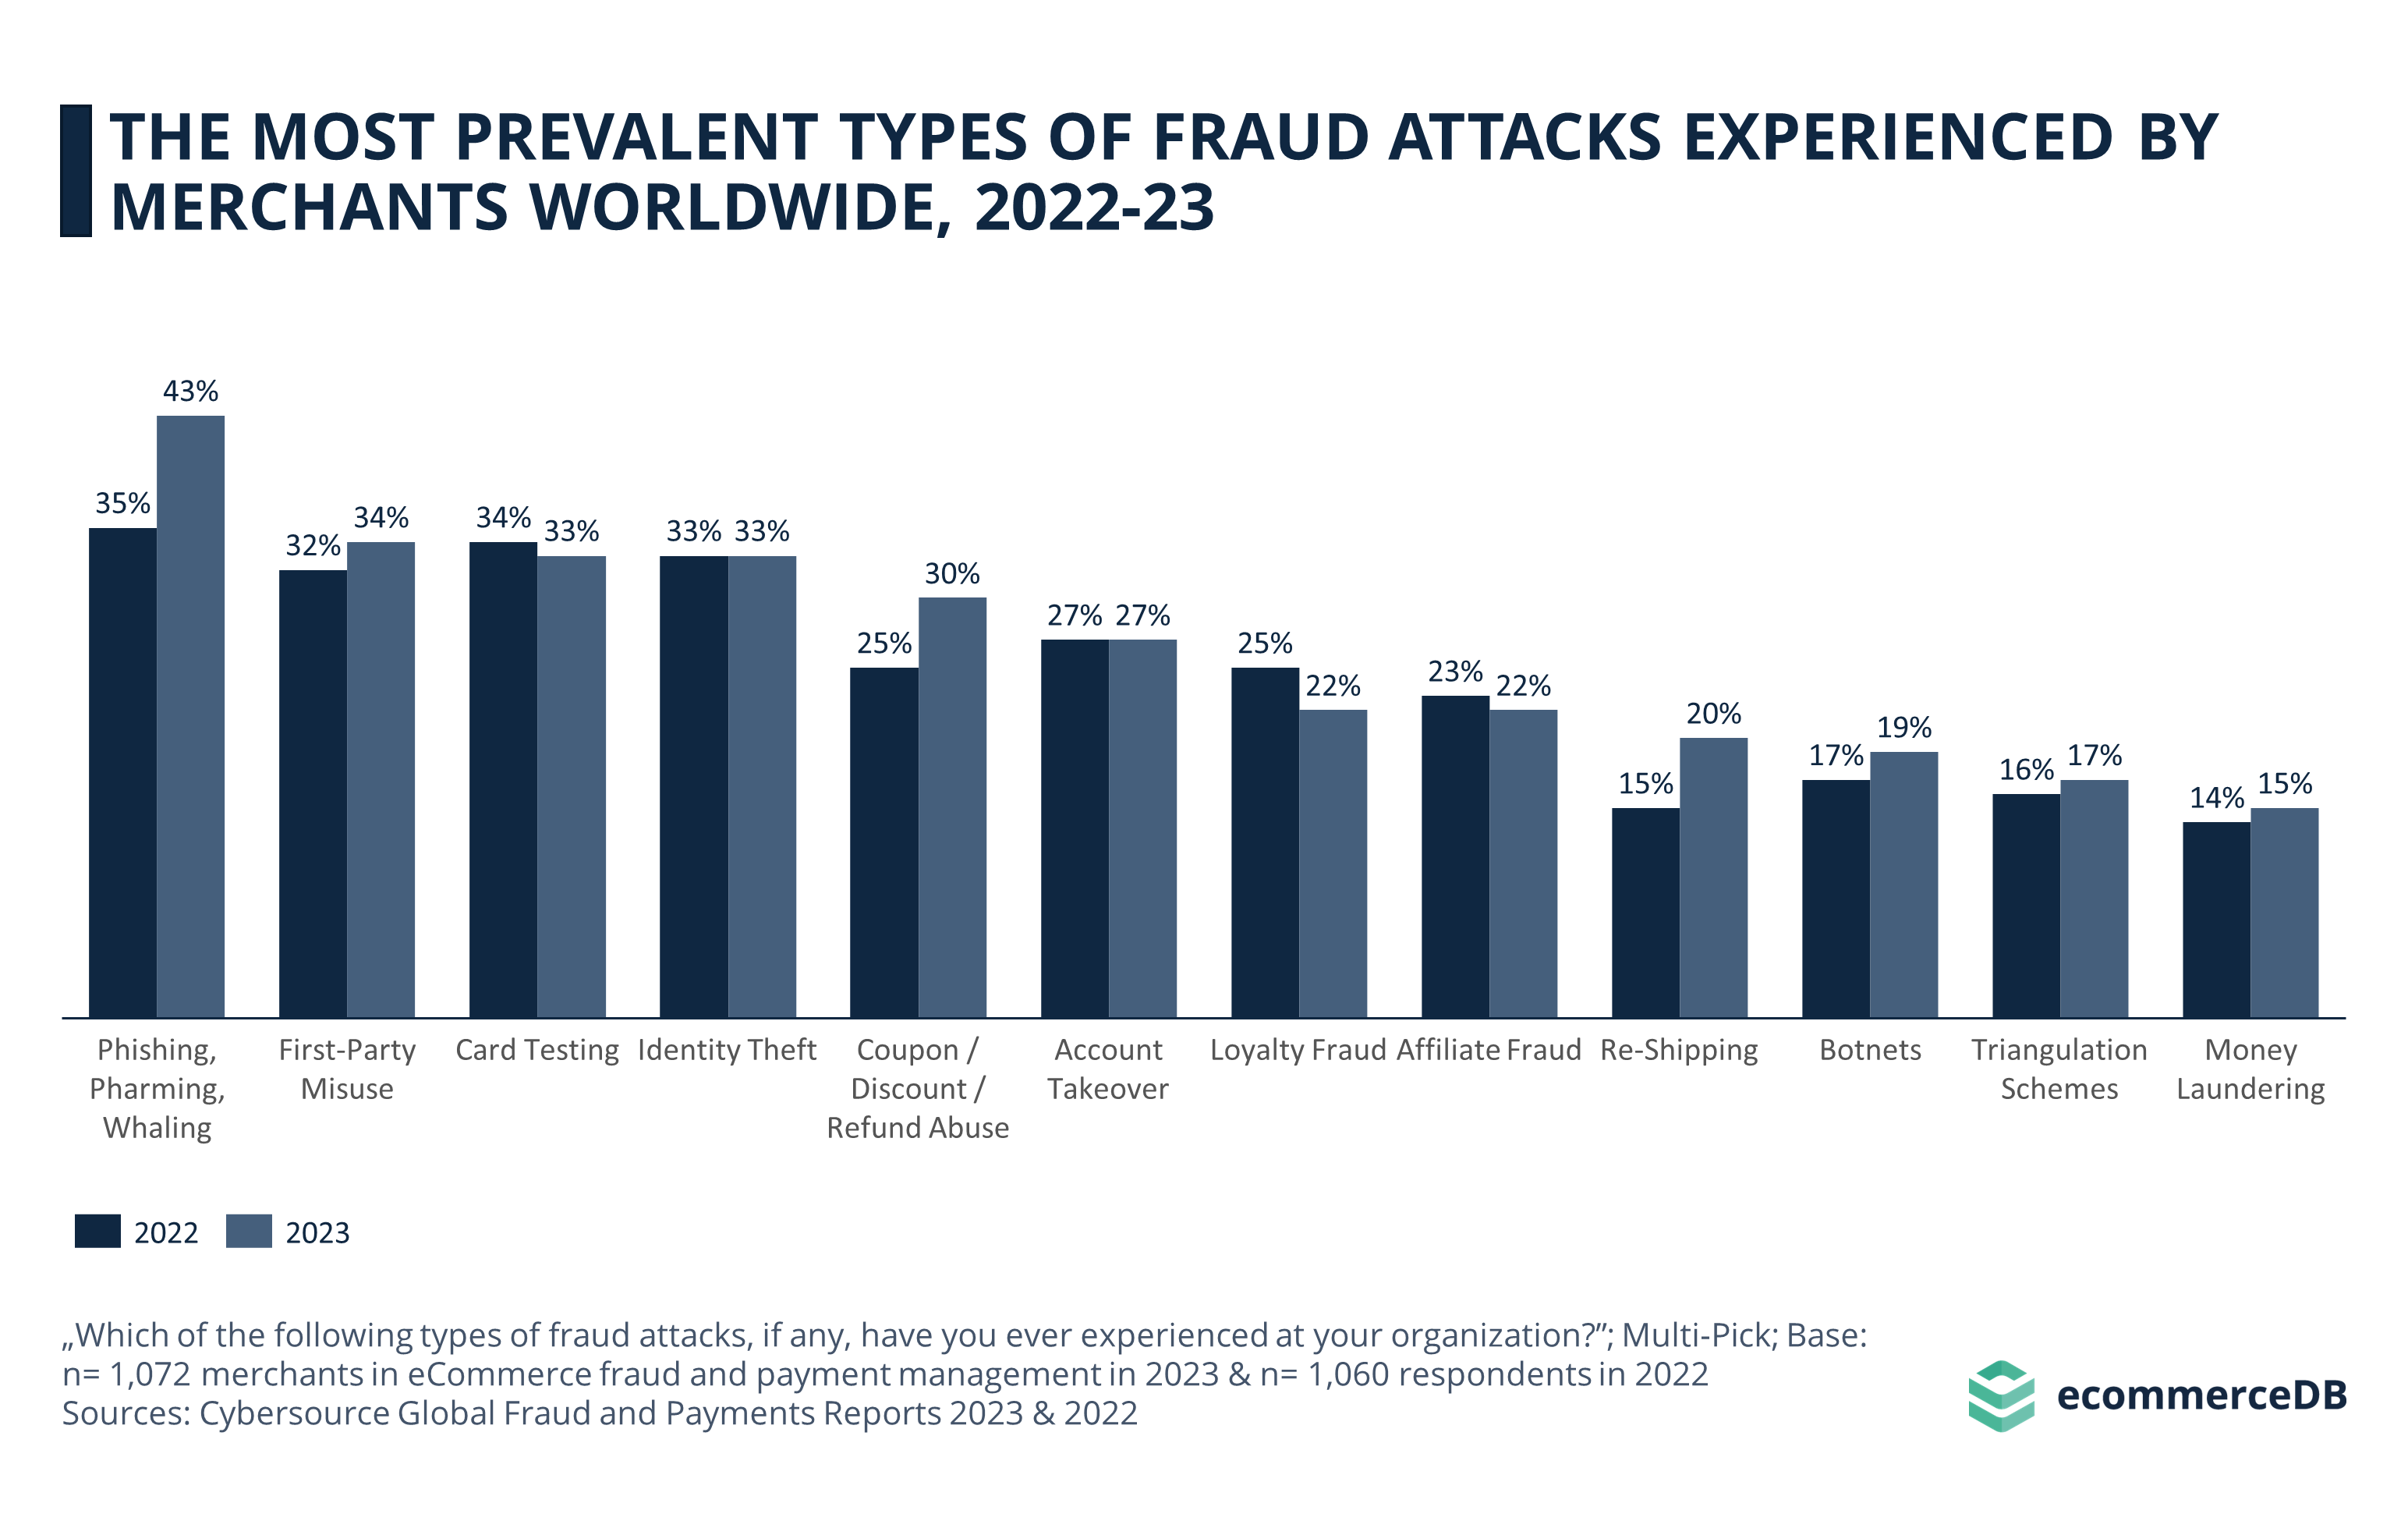 Most Prevalent Types of Fraud Attacks, 2022-23